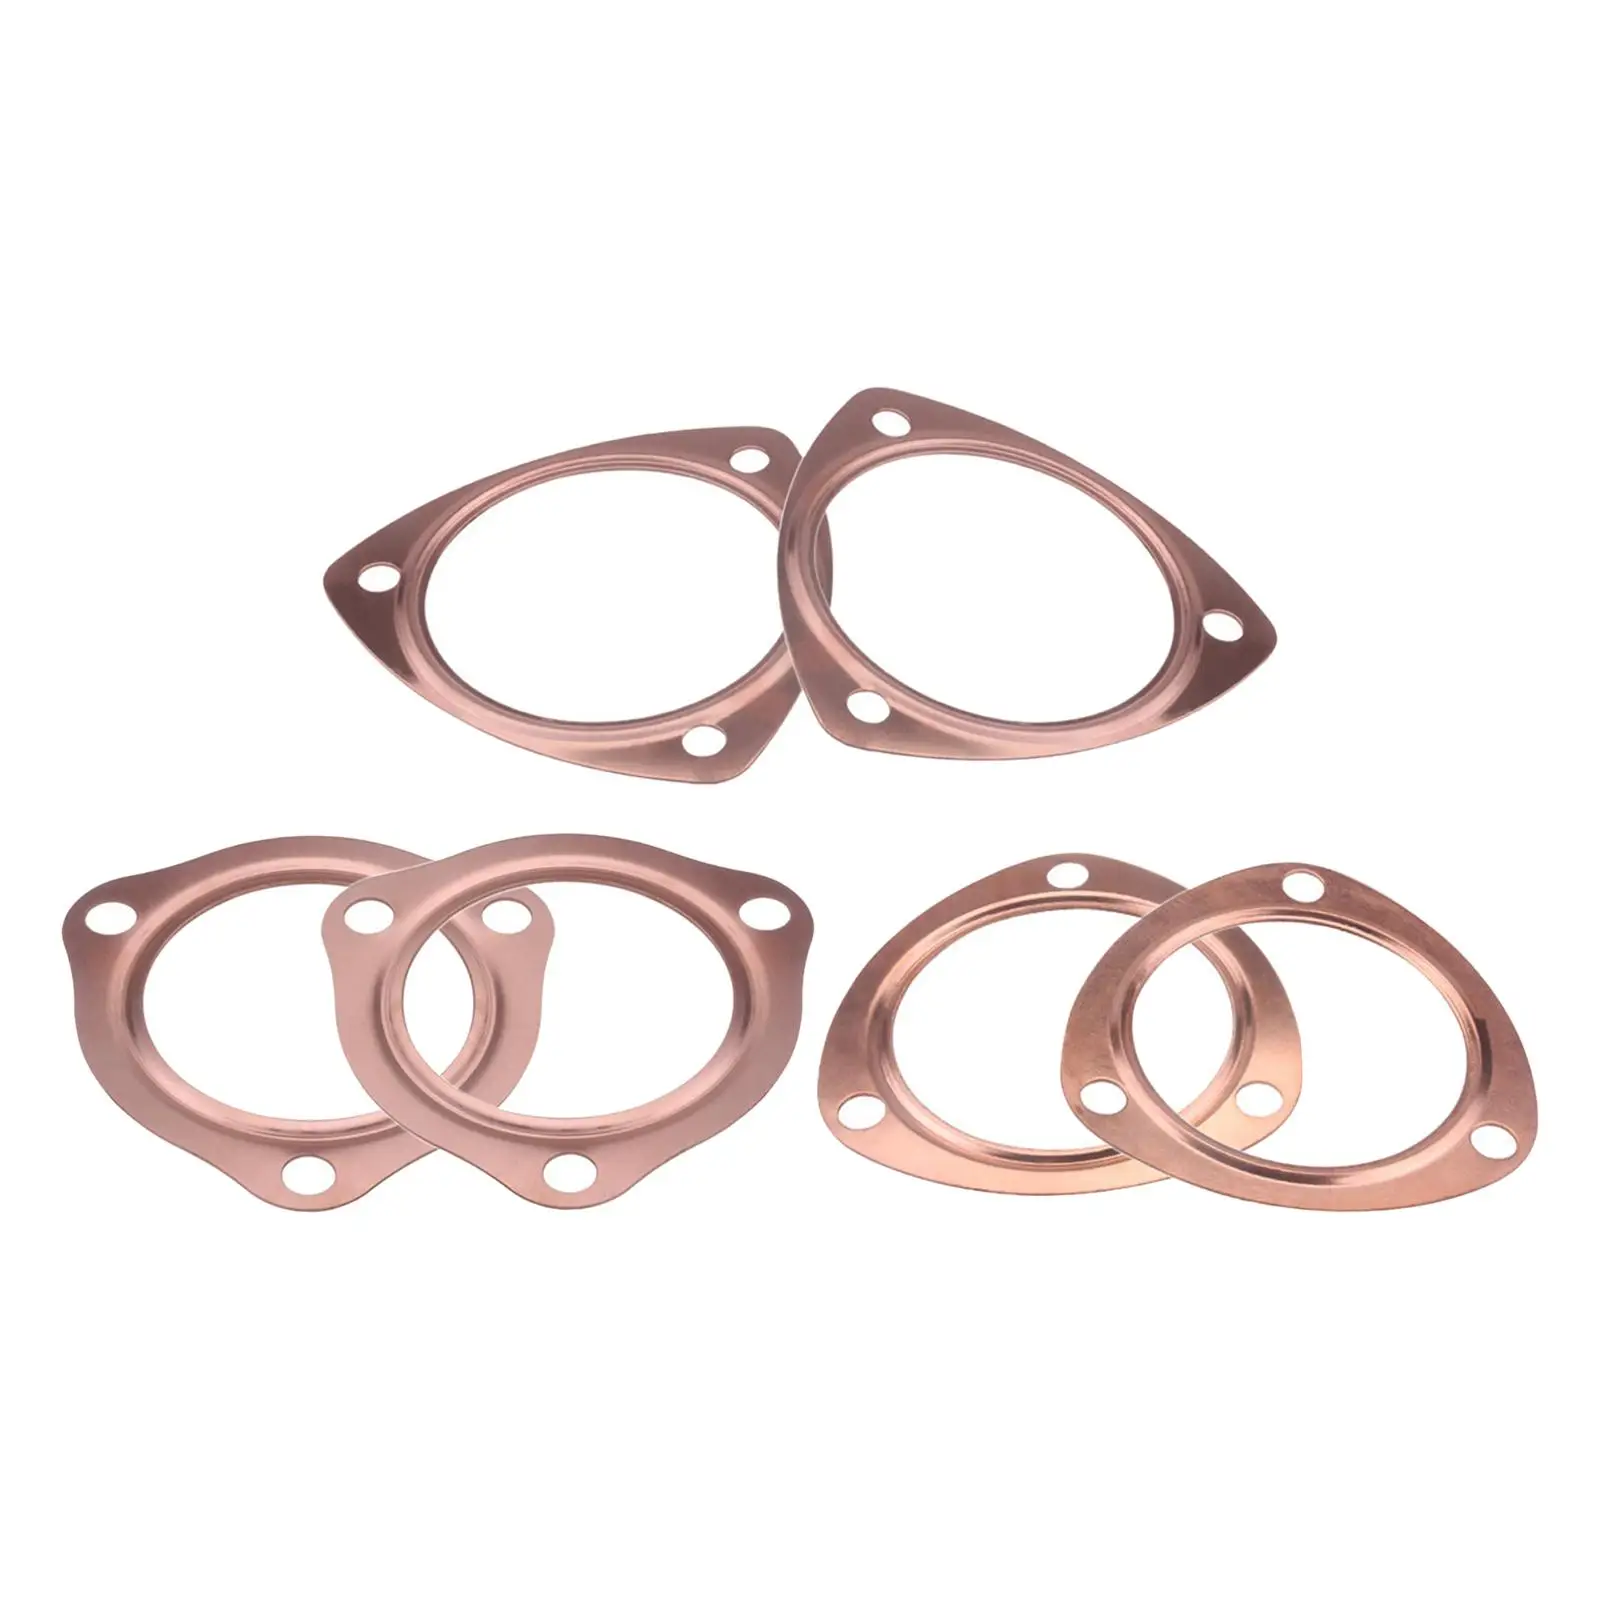 Copper Collector Gasket Anti Scratch Wear Resisting Anti Strike for Sbc 302 350 454 Car Direct Replaces Spare Parts